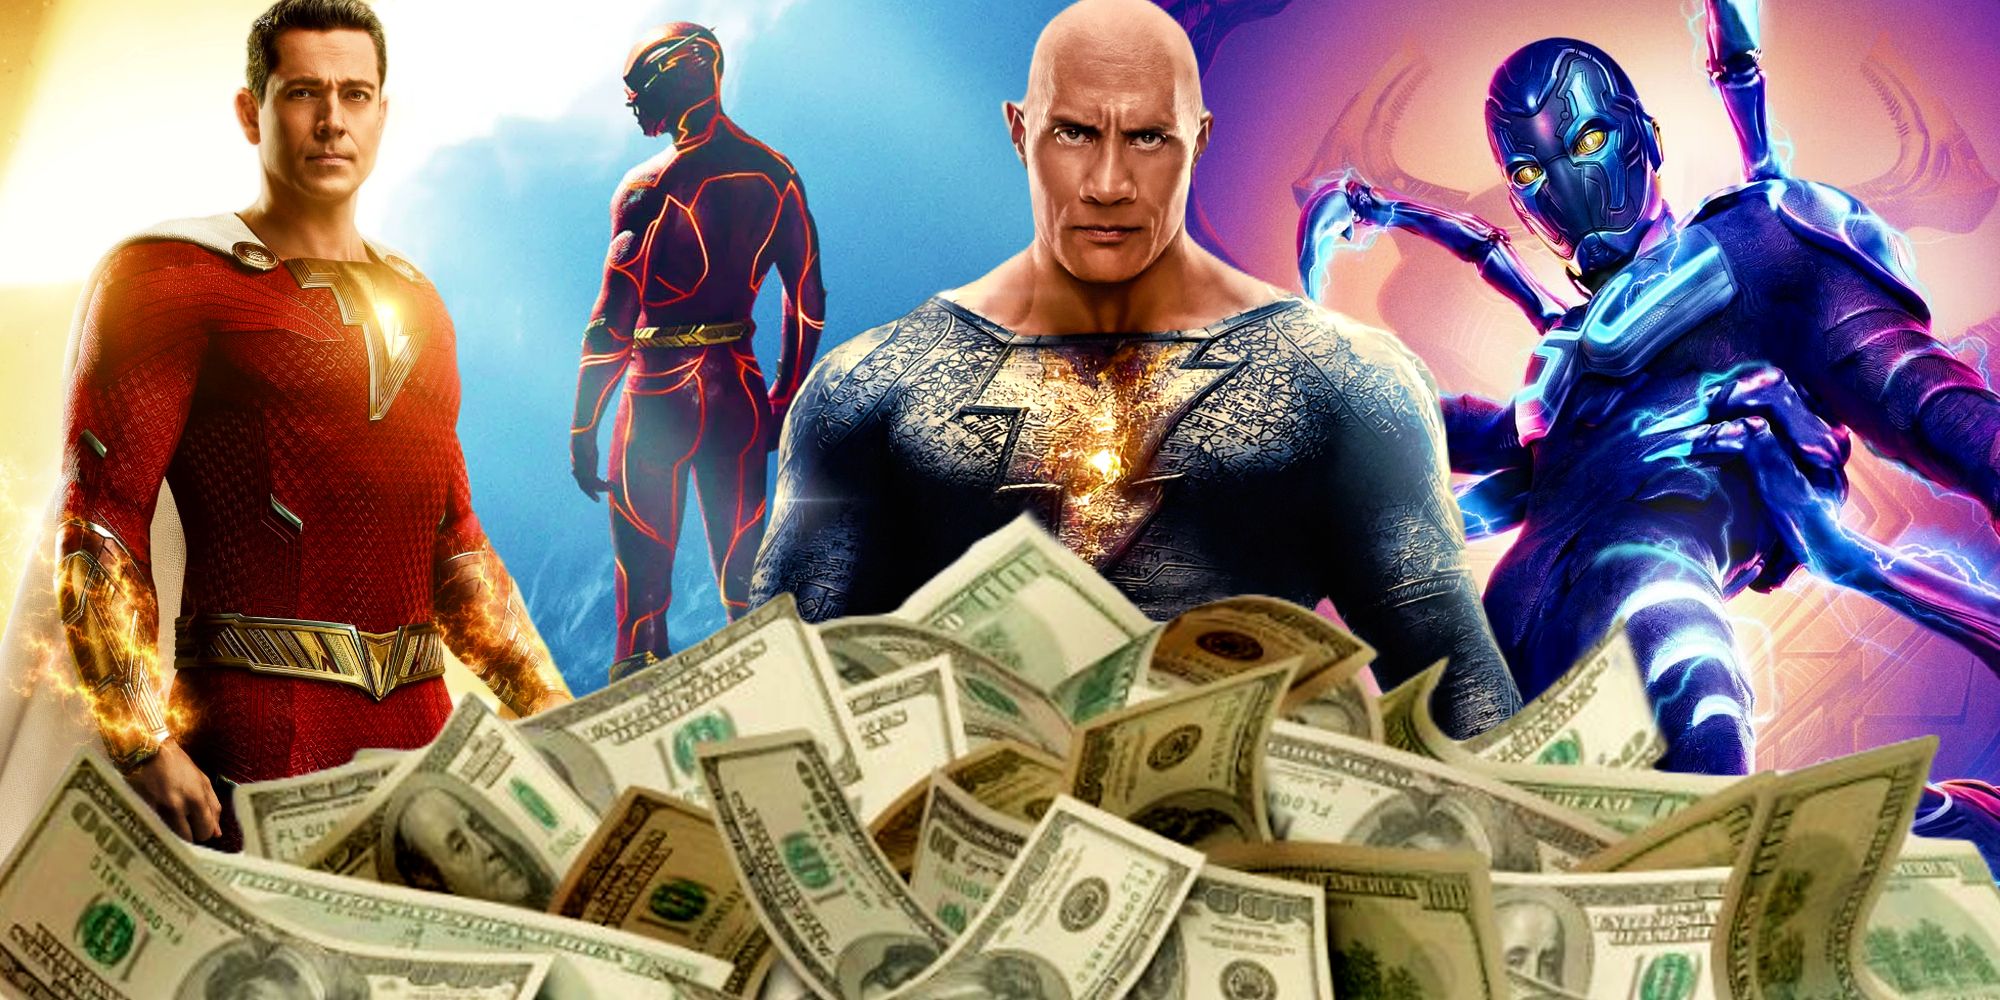 The Flash box office disappoints as its way lower than Black Adam